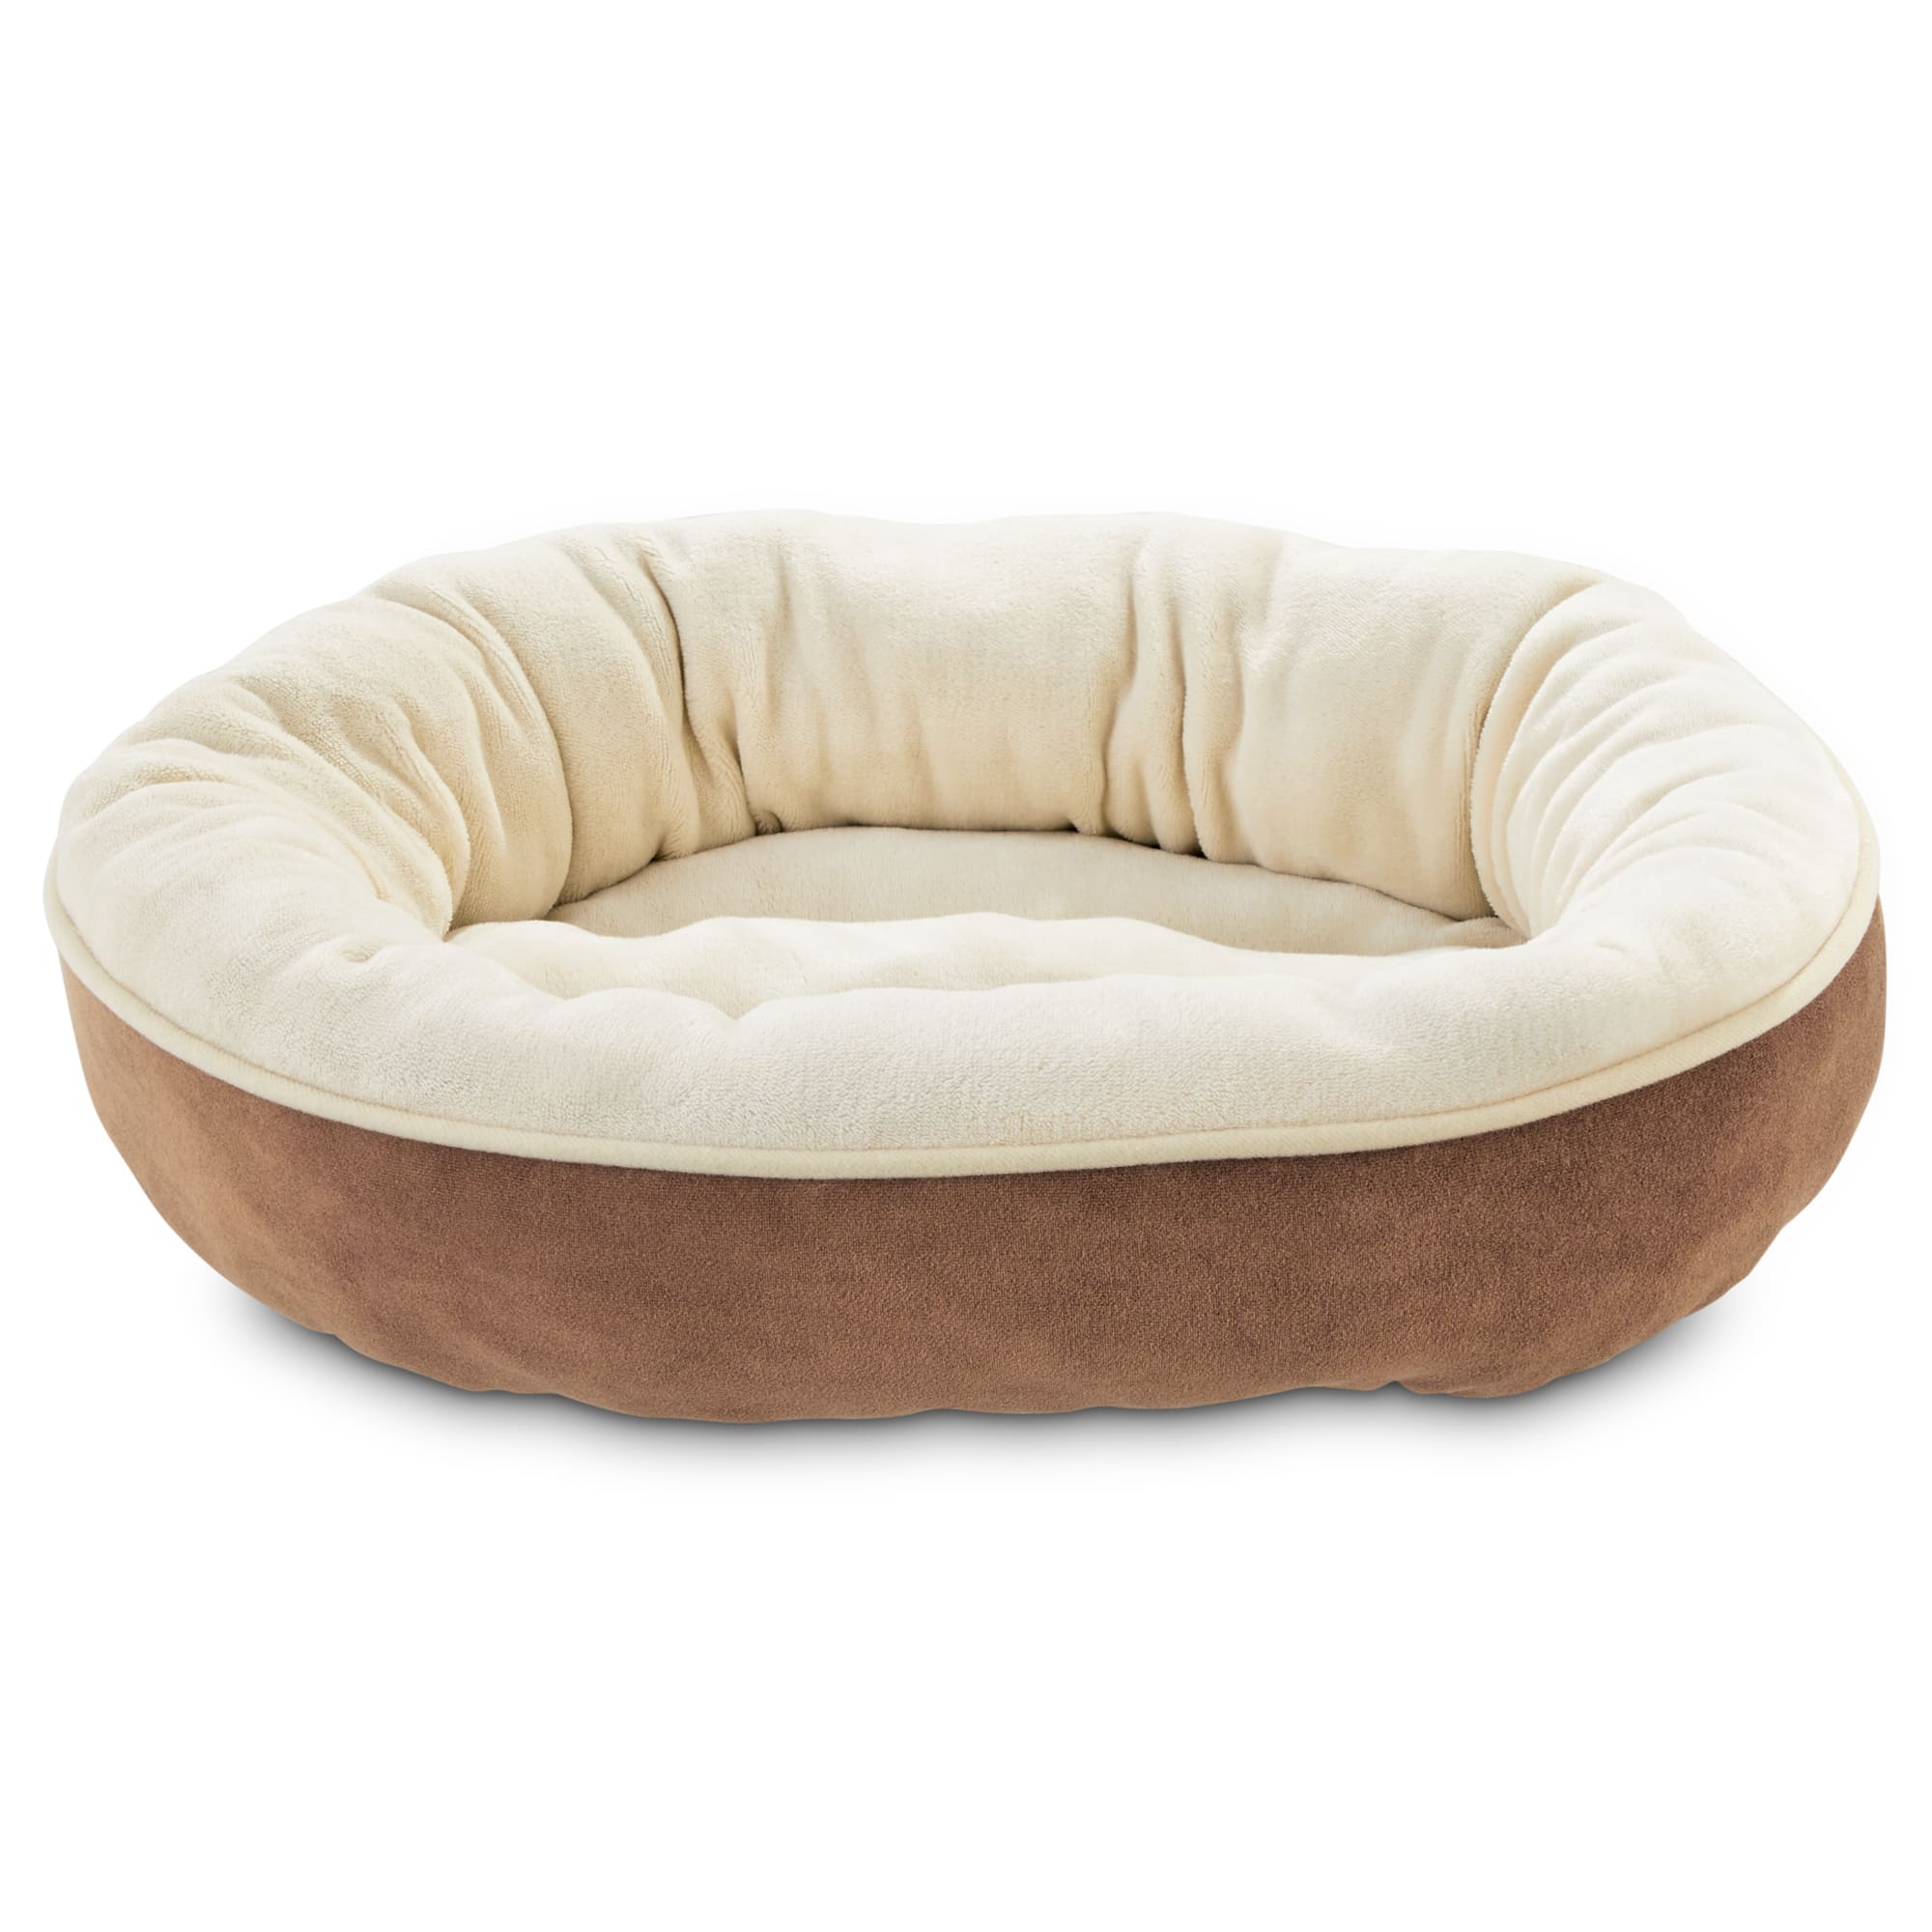 EveryYay Essentials Snooze Fest Brown Round Dog Bed, 20 L" X 20" W | Petco